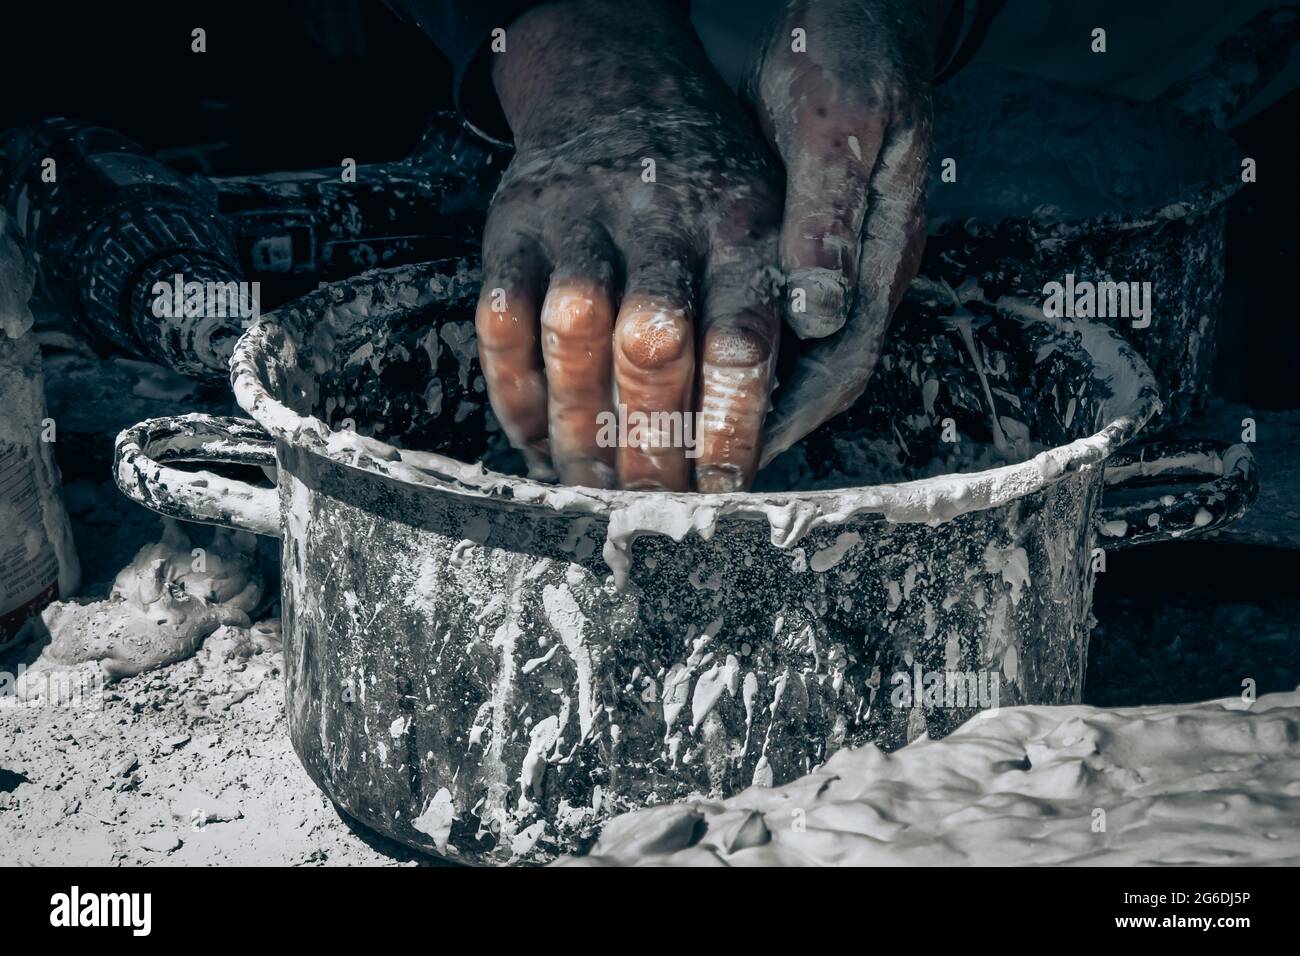 Man washing his hands after working with clay Stock Photo